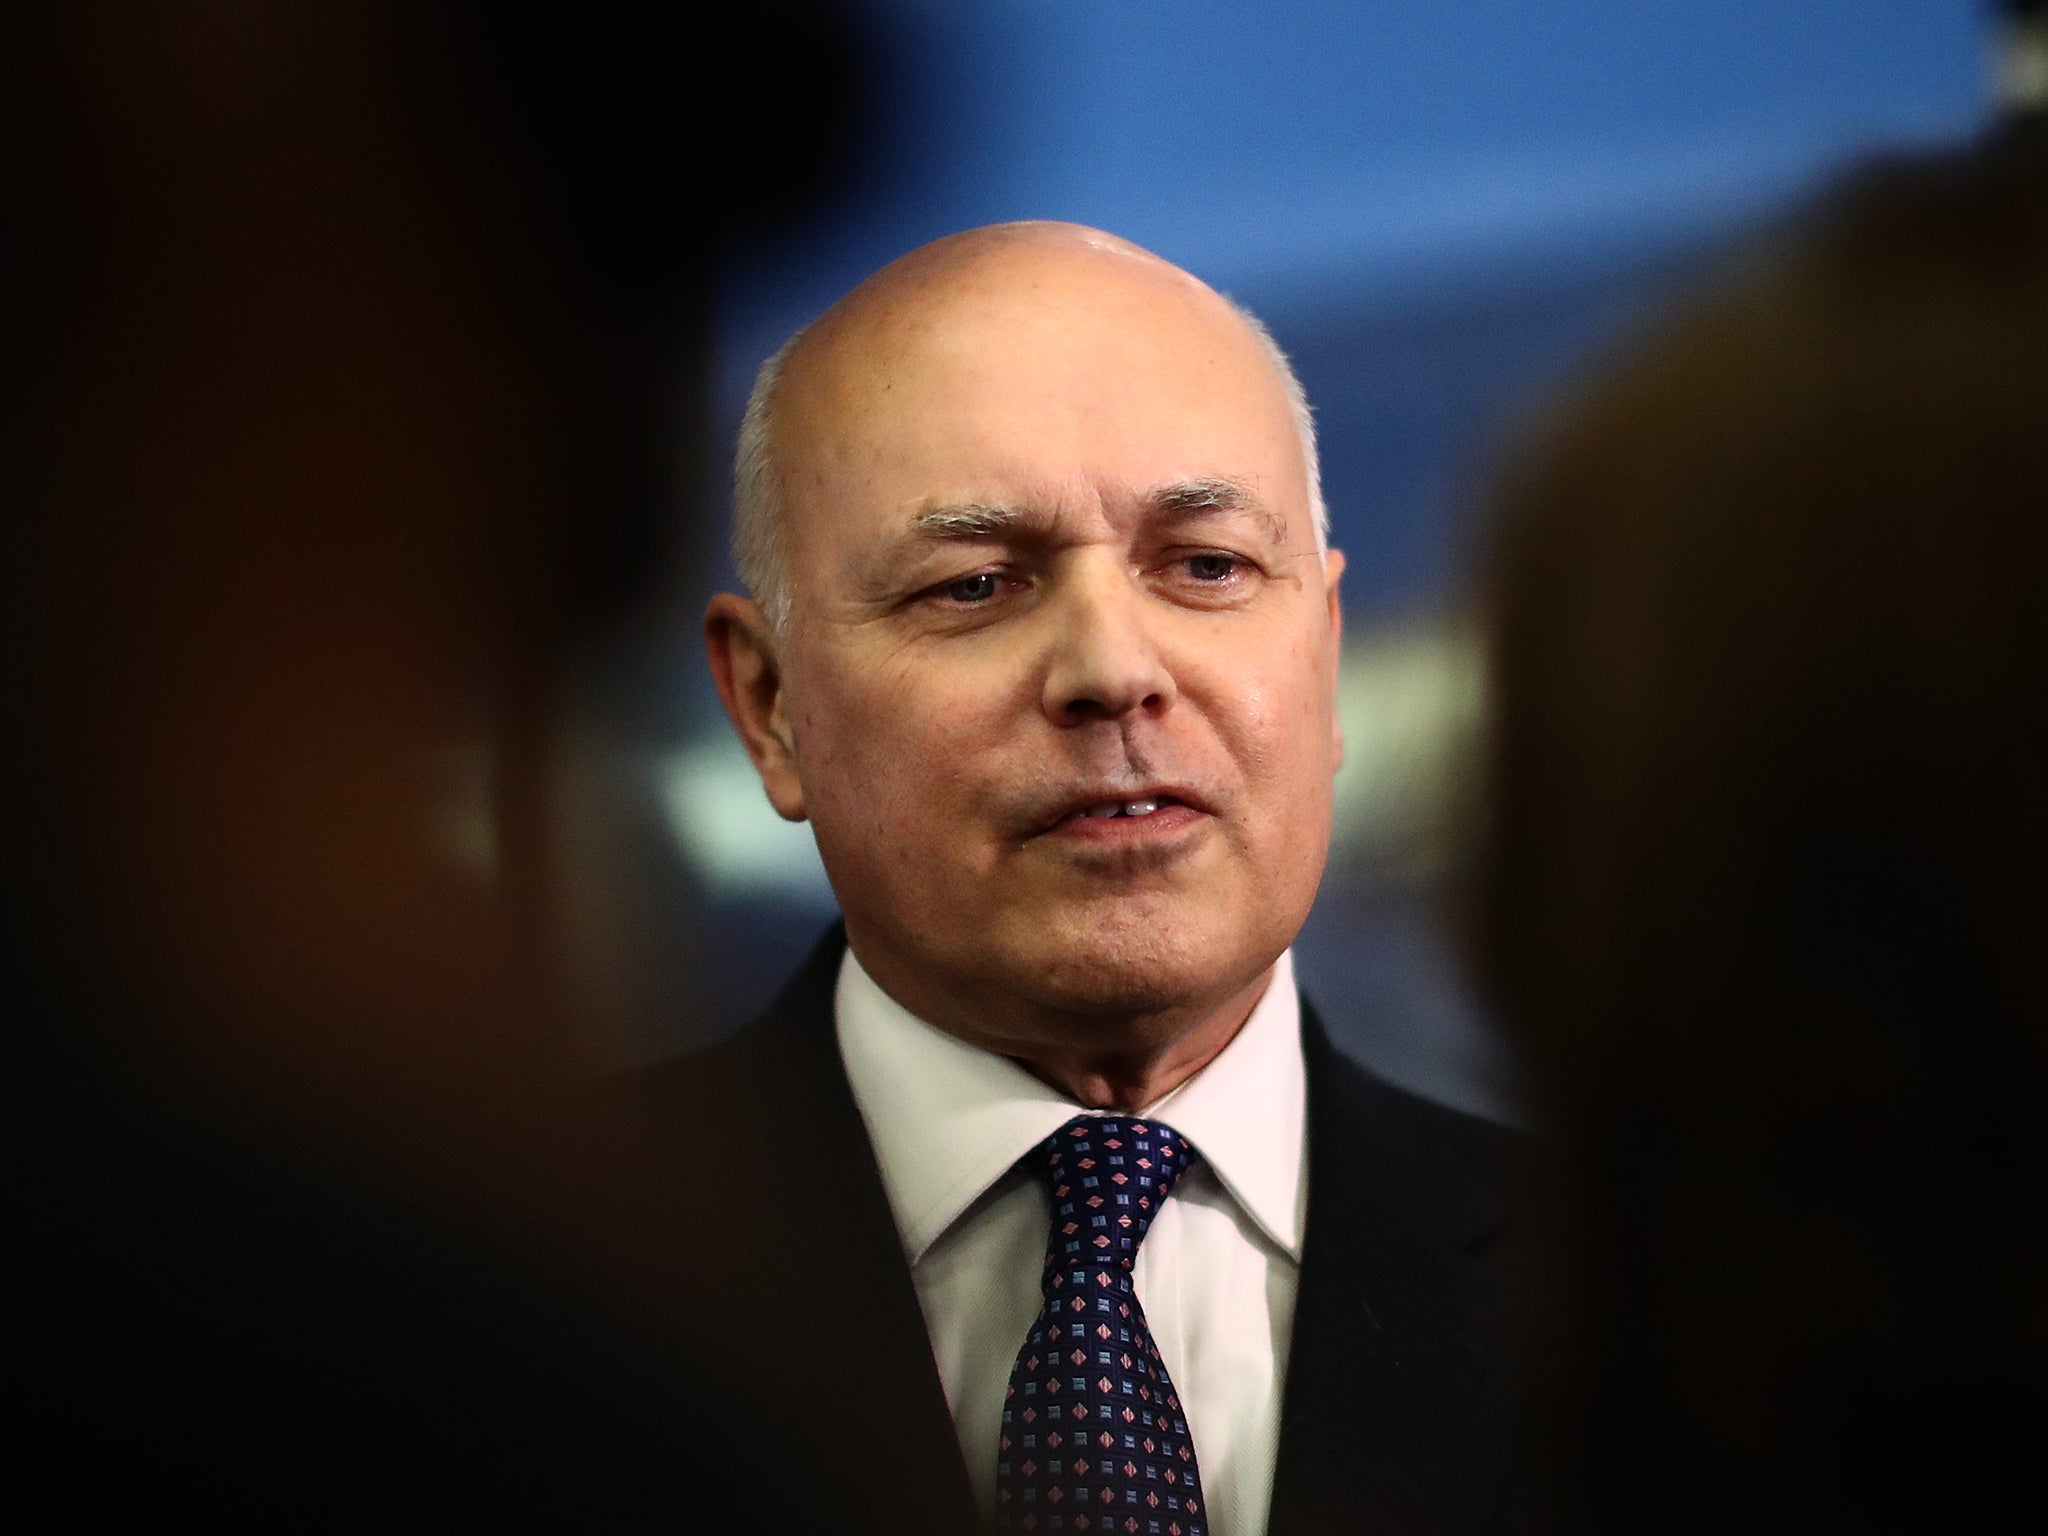 Iain Duncan Smith was Work and Pensions Secretary until earlier this year, when he resigned over benefits cuts